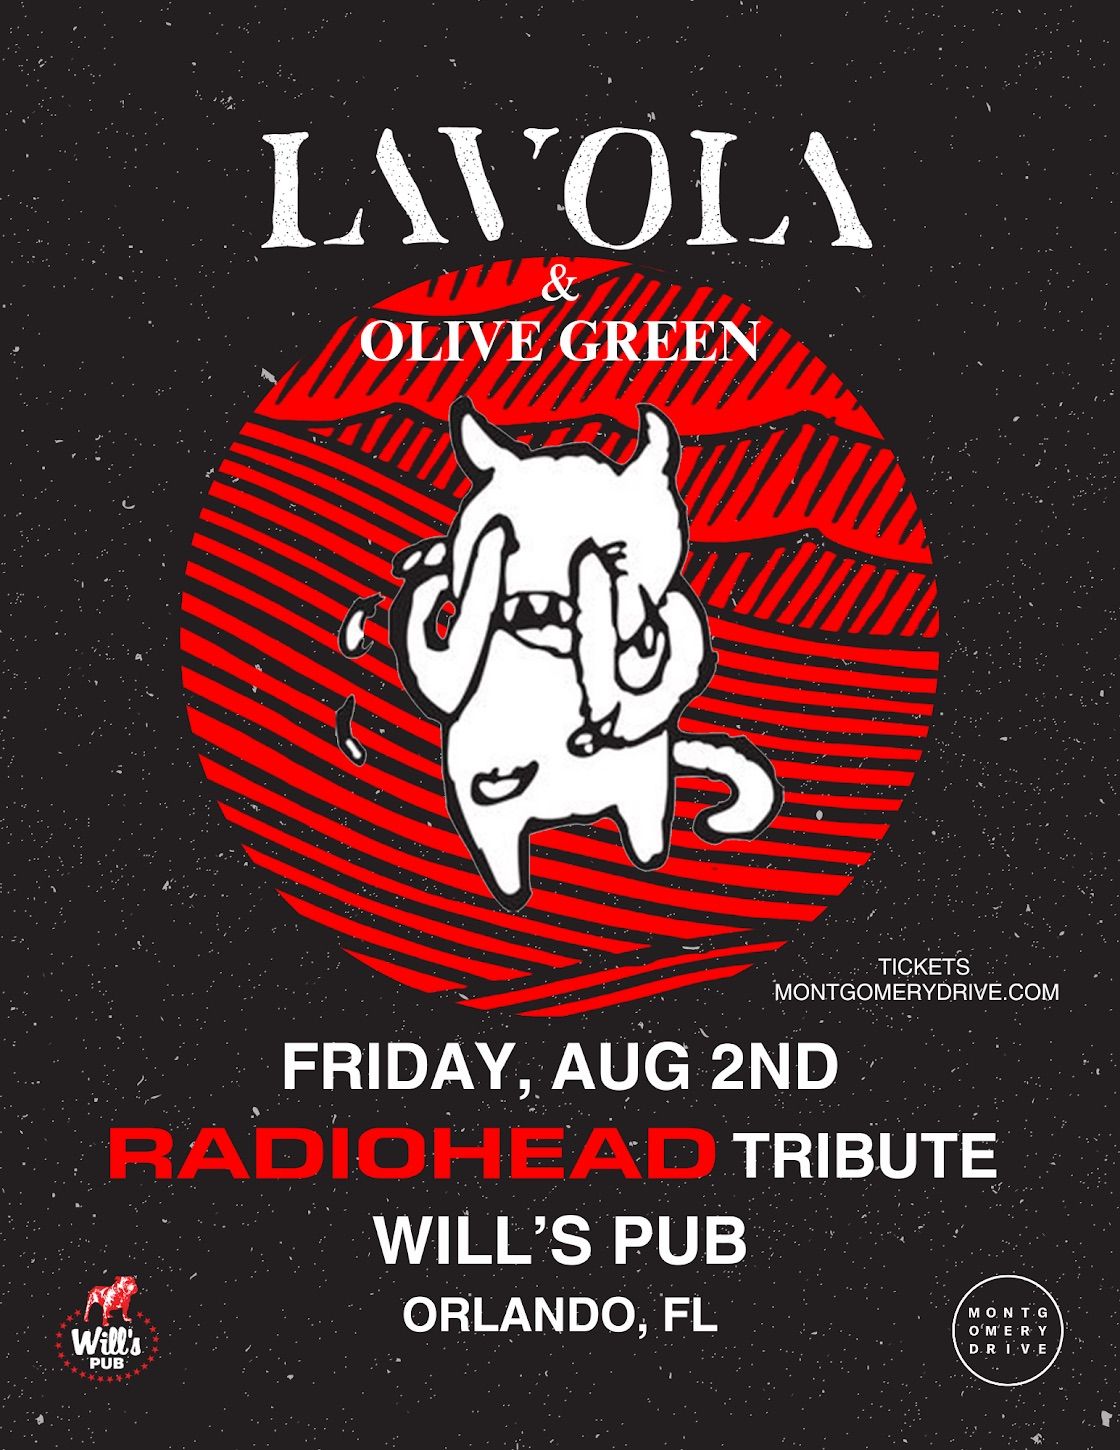 Radiohead Tribute featuring Lavola with Olive Green at Will\u2019s Pub - Orlando, FL